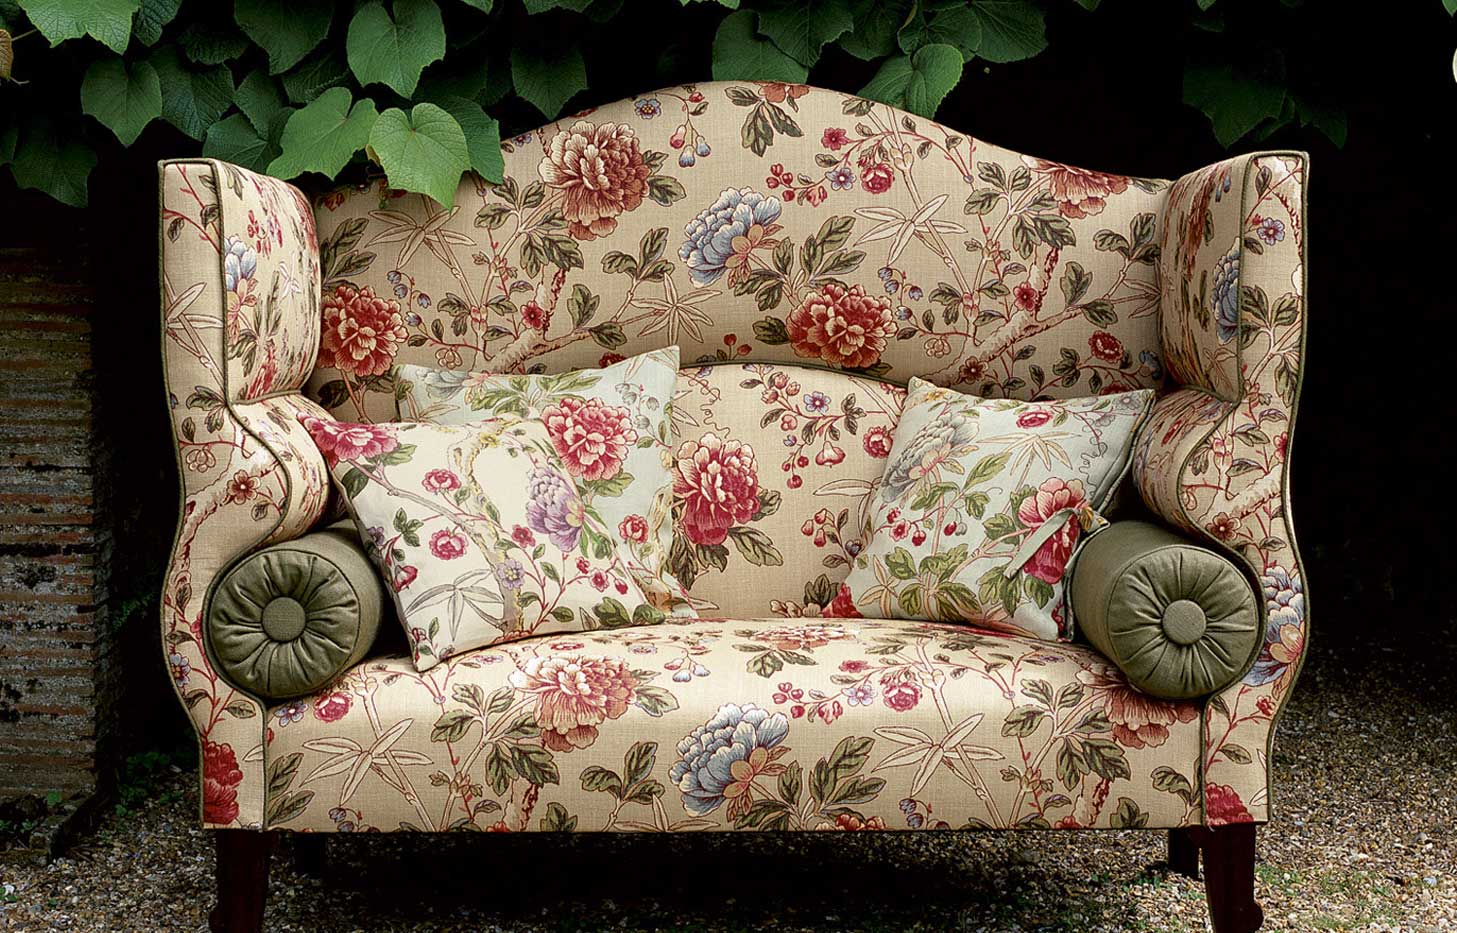 Chair outside in garden with cushions